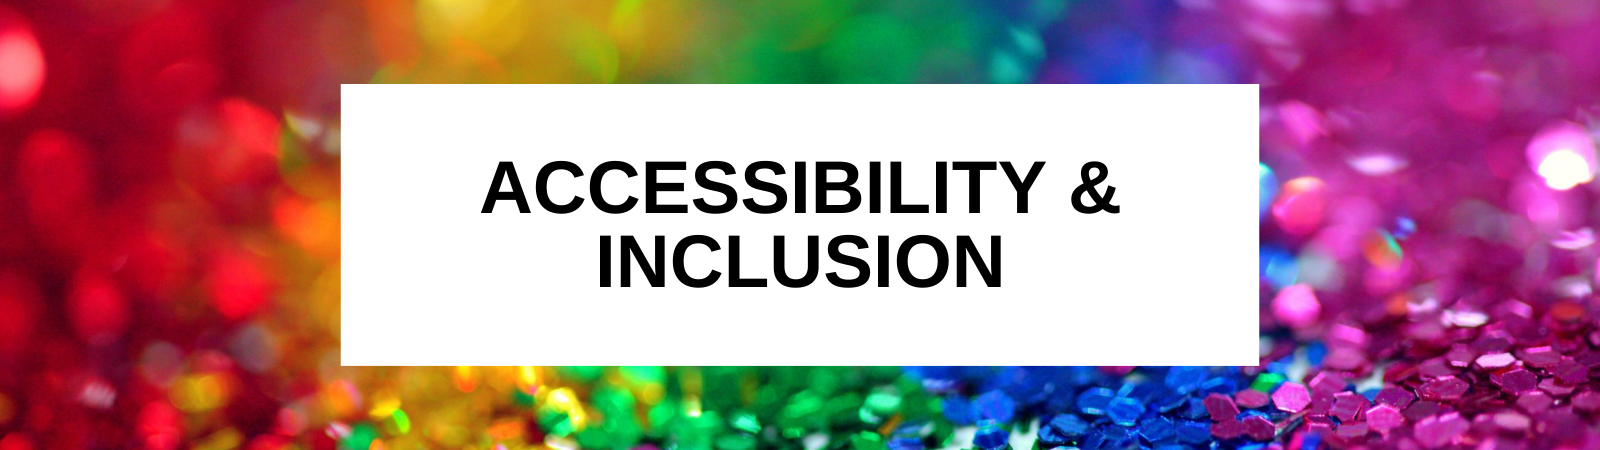 Accessibility and Inclusion banner overlaid on background with rainbow glitter